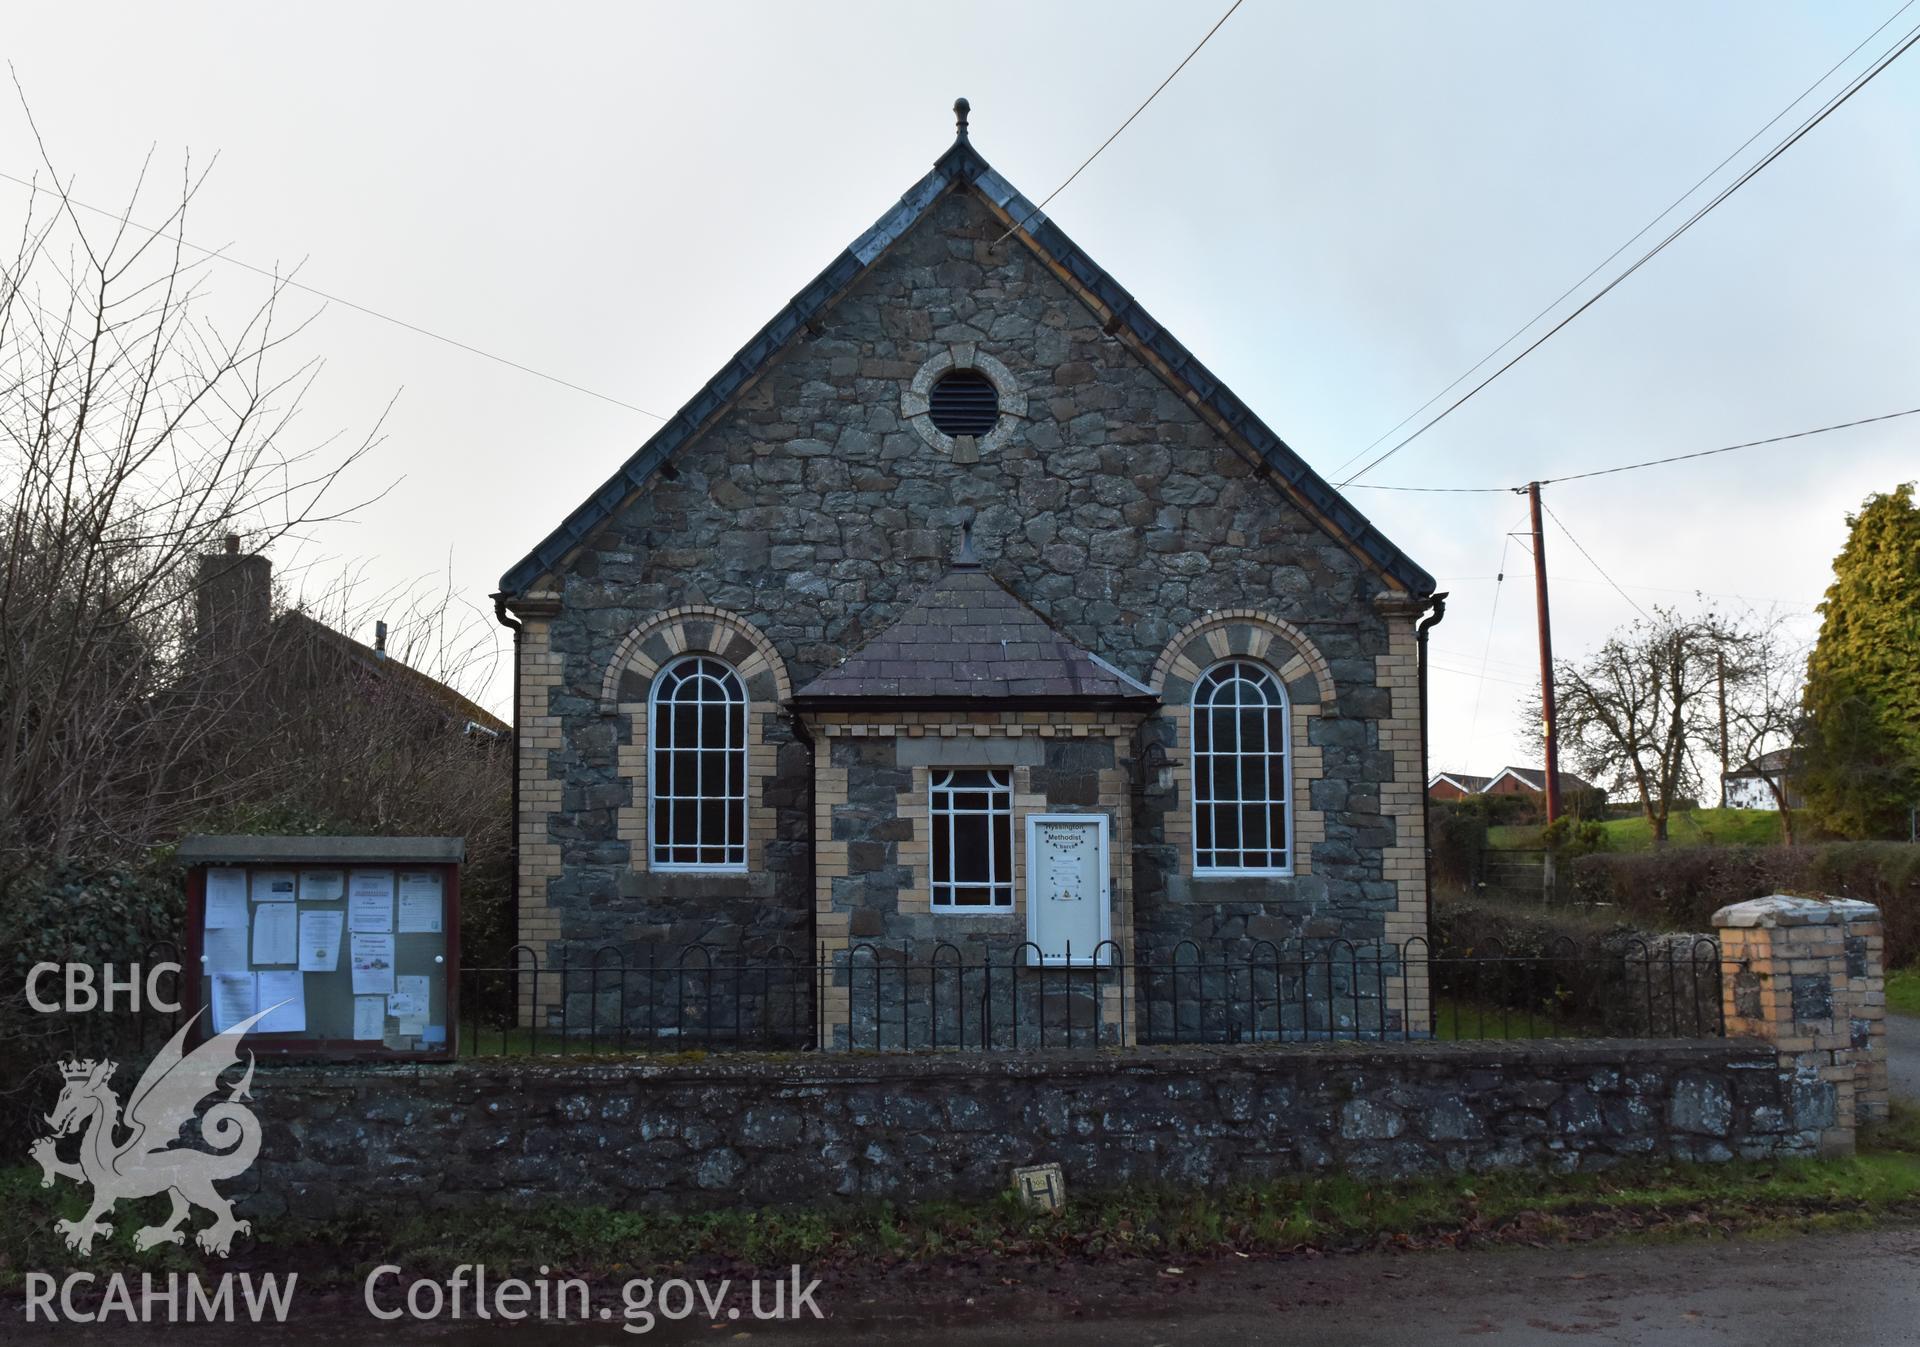 View from the east showing the exterior of the front gable at Hyssington Primitive Methodist Chapel, Hyssington, Churchstoke. Photographic survey conducted by Sue Fielding on 7th December 2018.